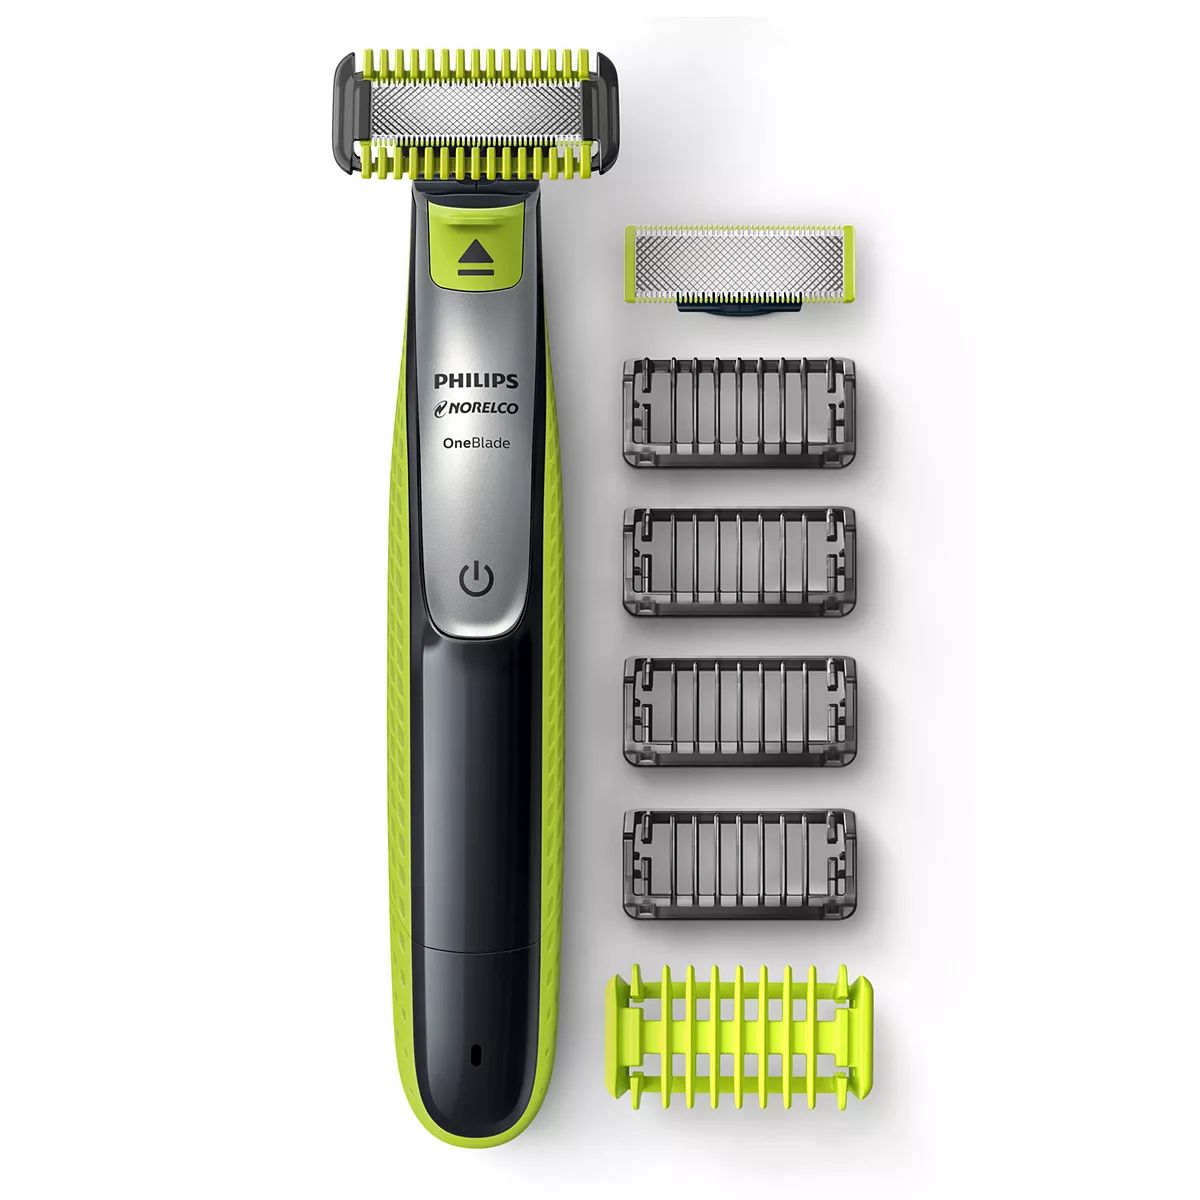 Philips Norelco OneBlade Face + Body Hybrid Electric Trimmer & Shaver | Kohl's